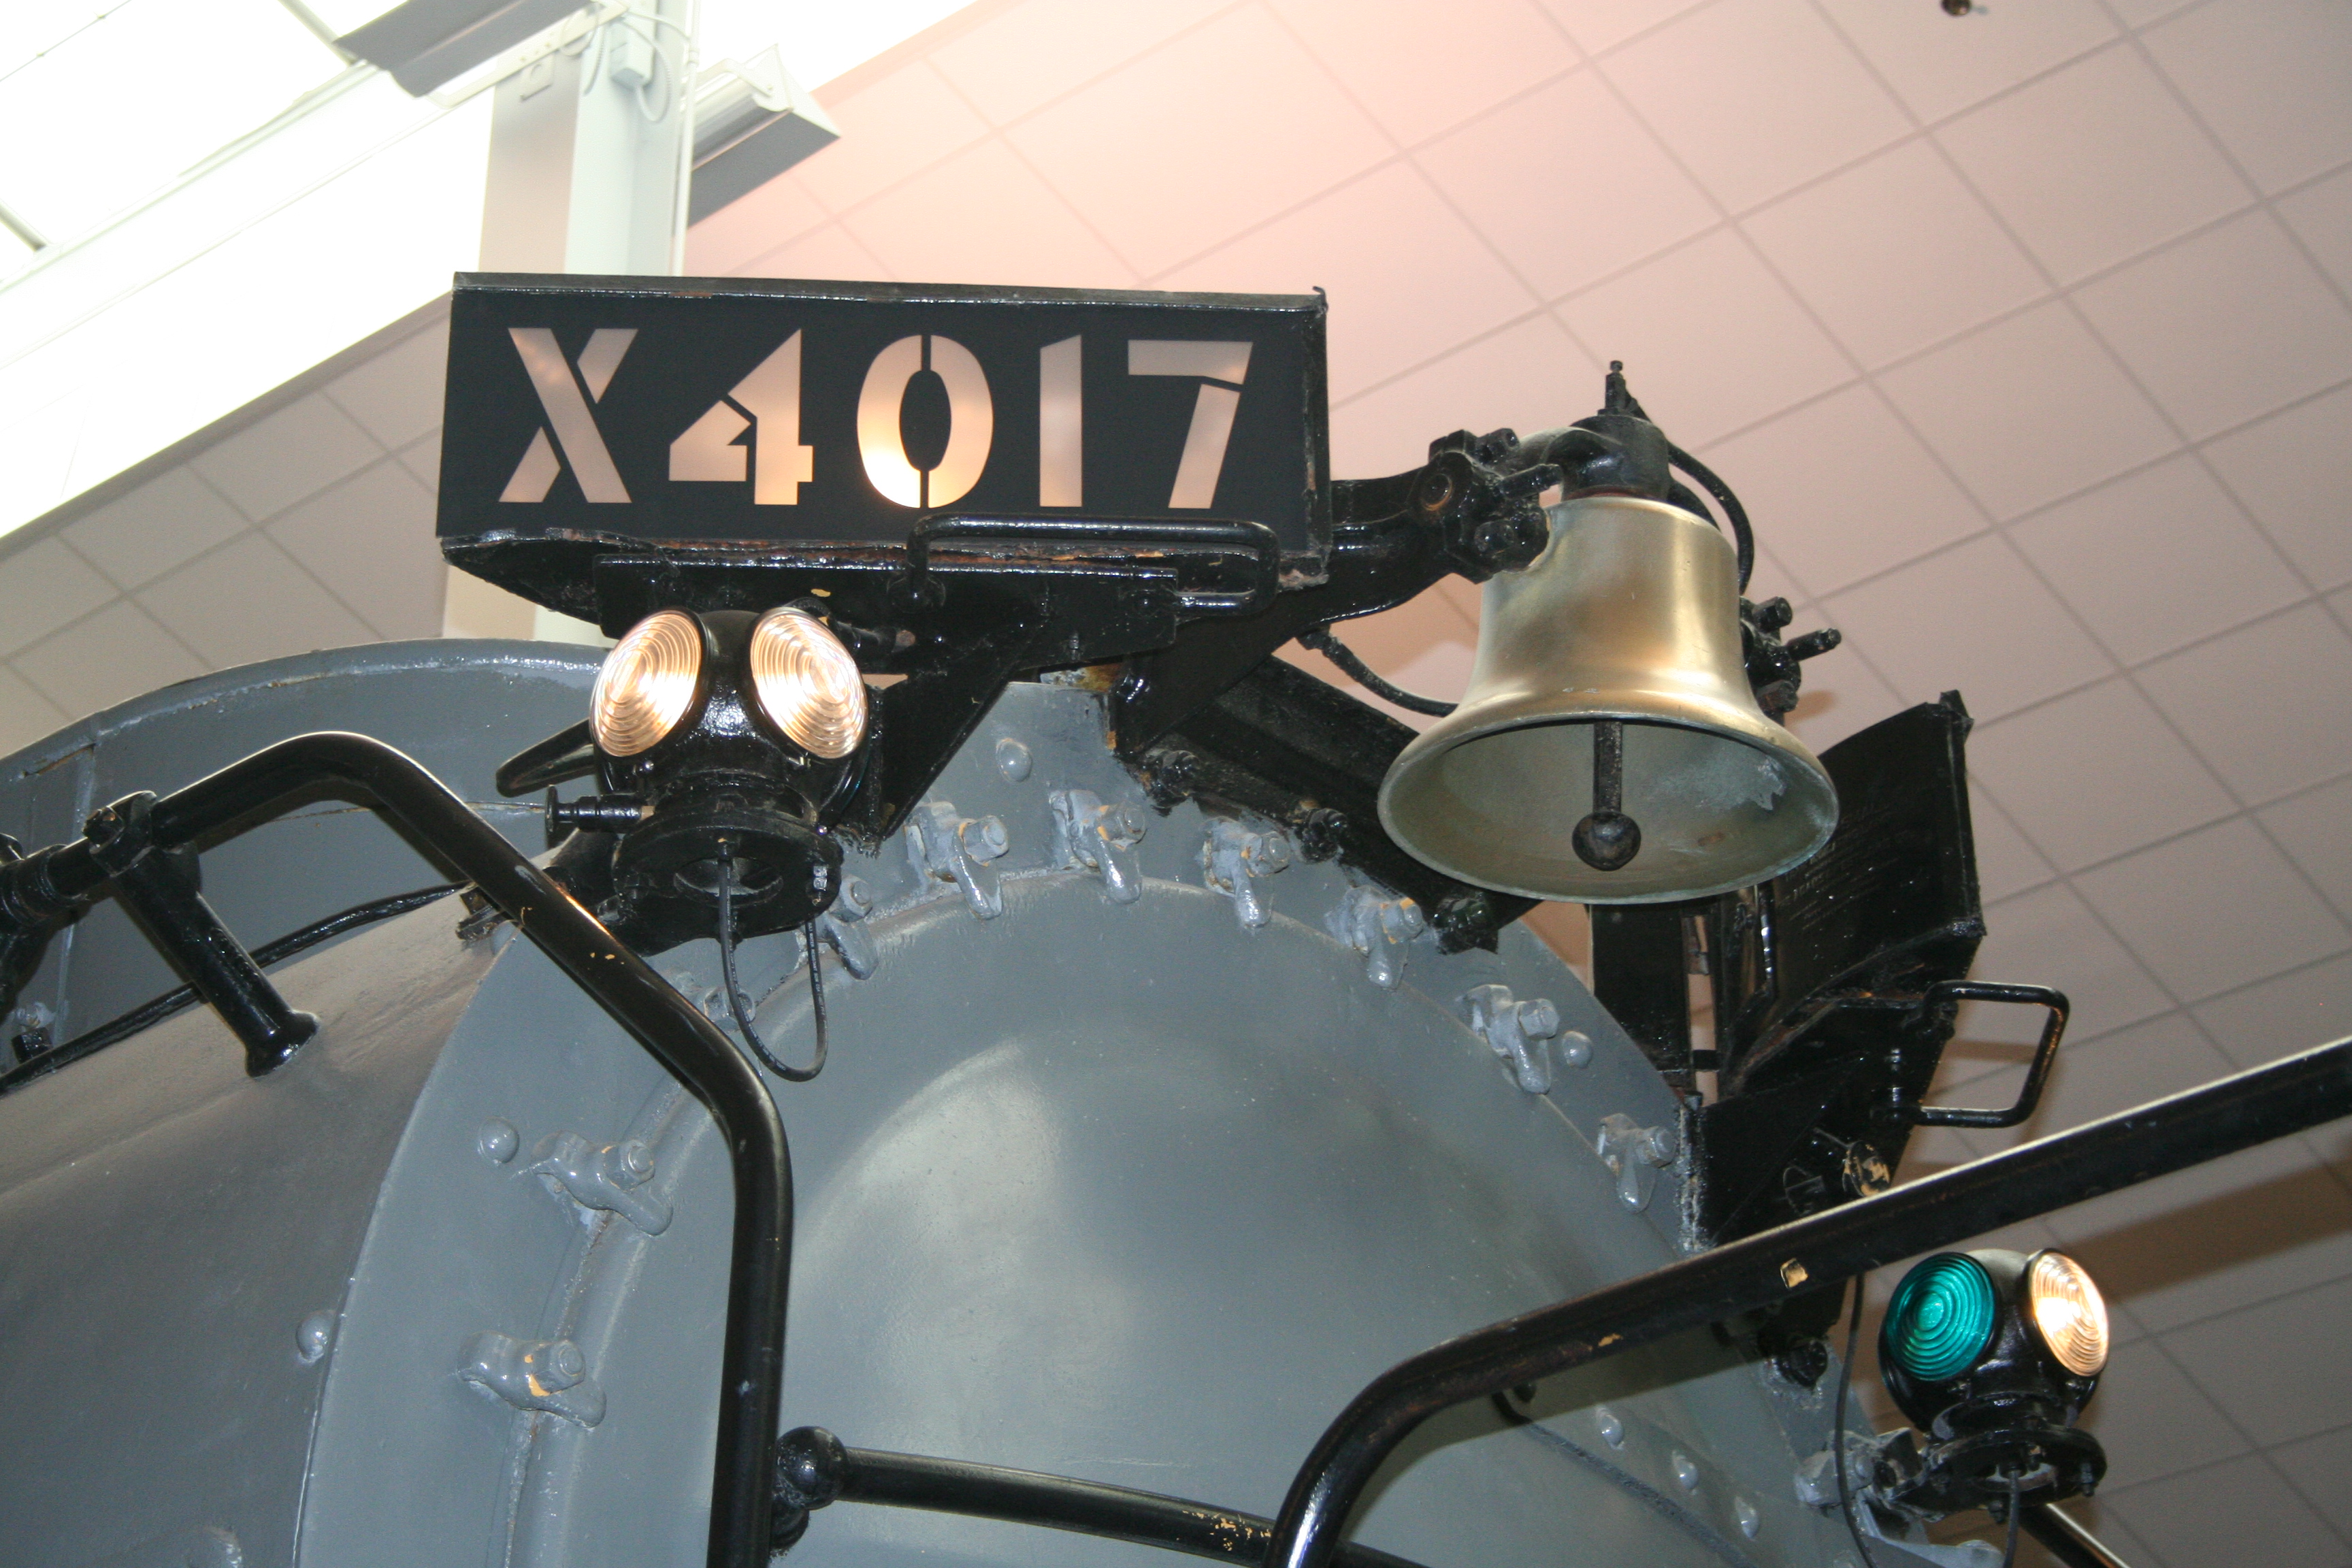 UP_Big_Boy_4017_Bell_and_Number.jpg